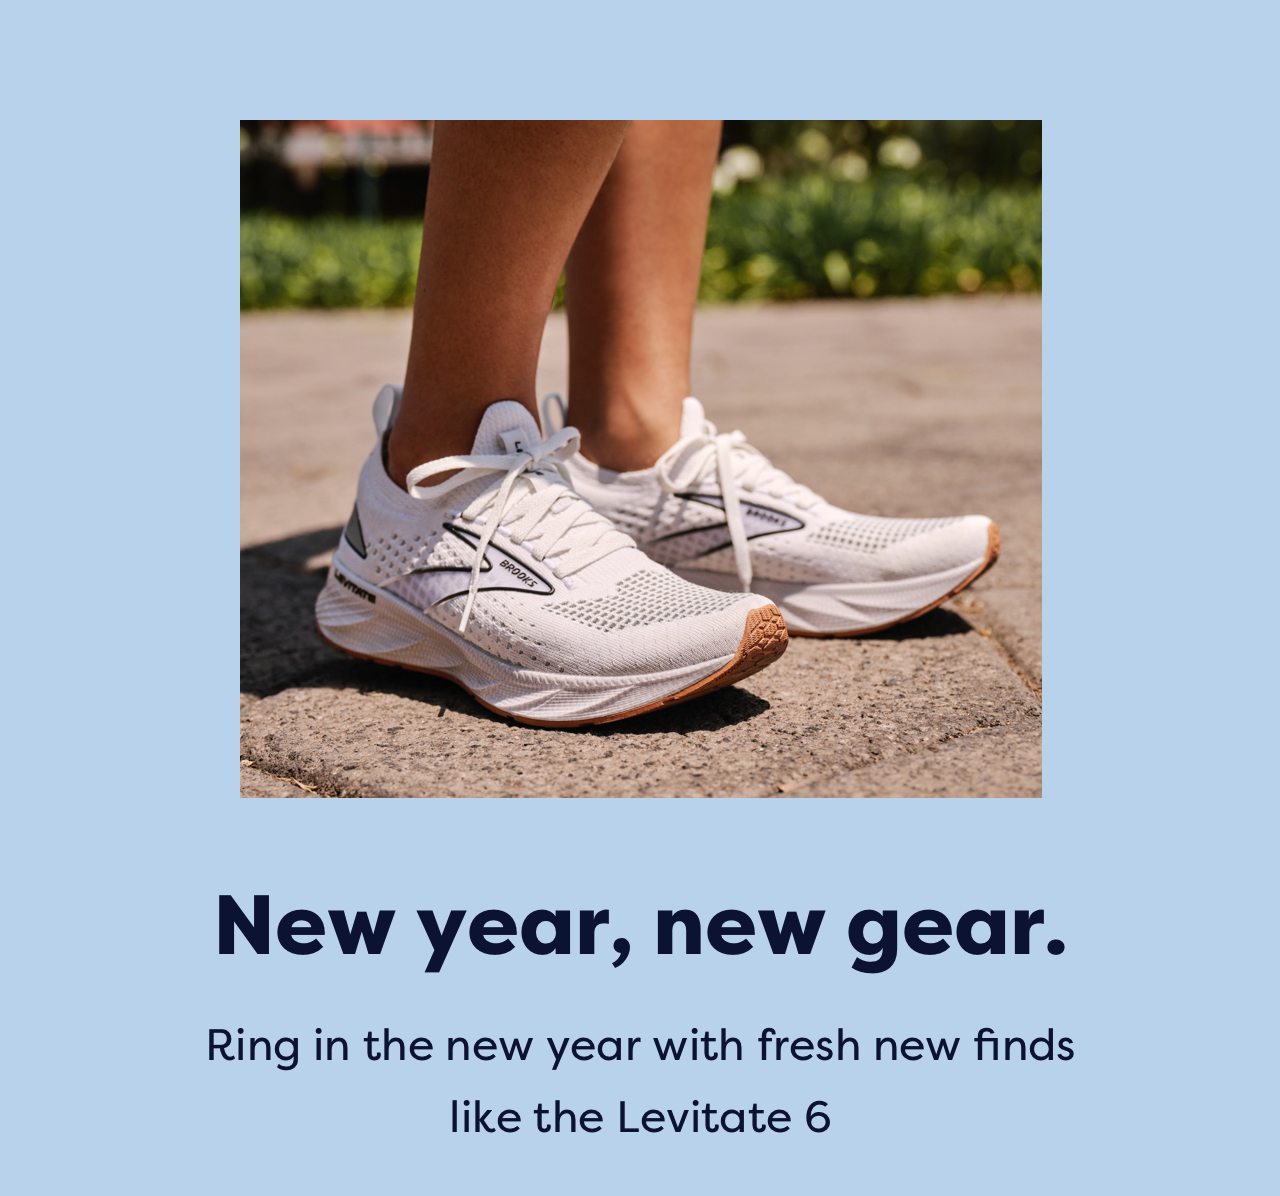 New year, new gear. - Ring in the new year with fresh new finds like the Levitate 6